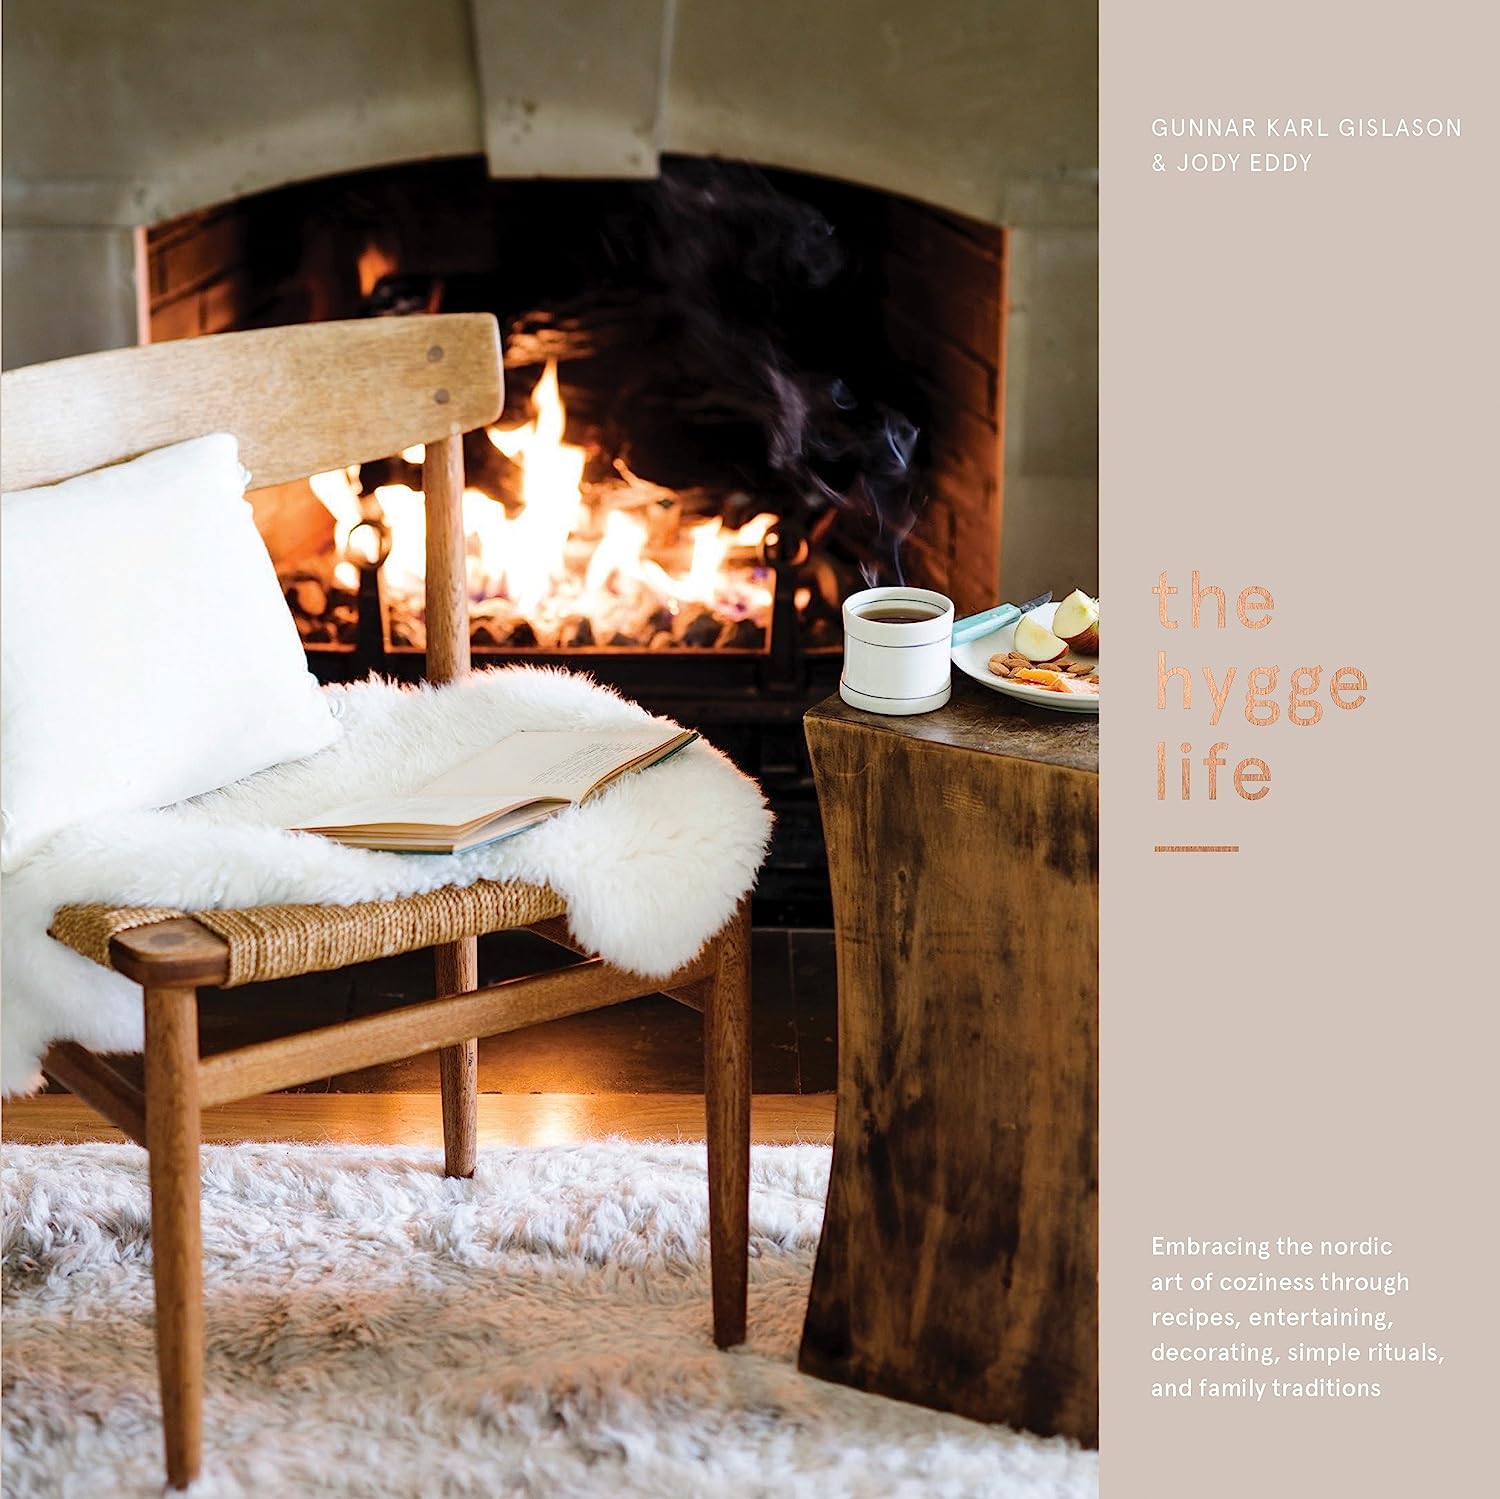 Nordic Art of Coziness Through Recipes, Entertaining, Decorating, Simple Rituals, and Family Traditions